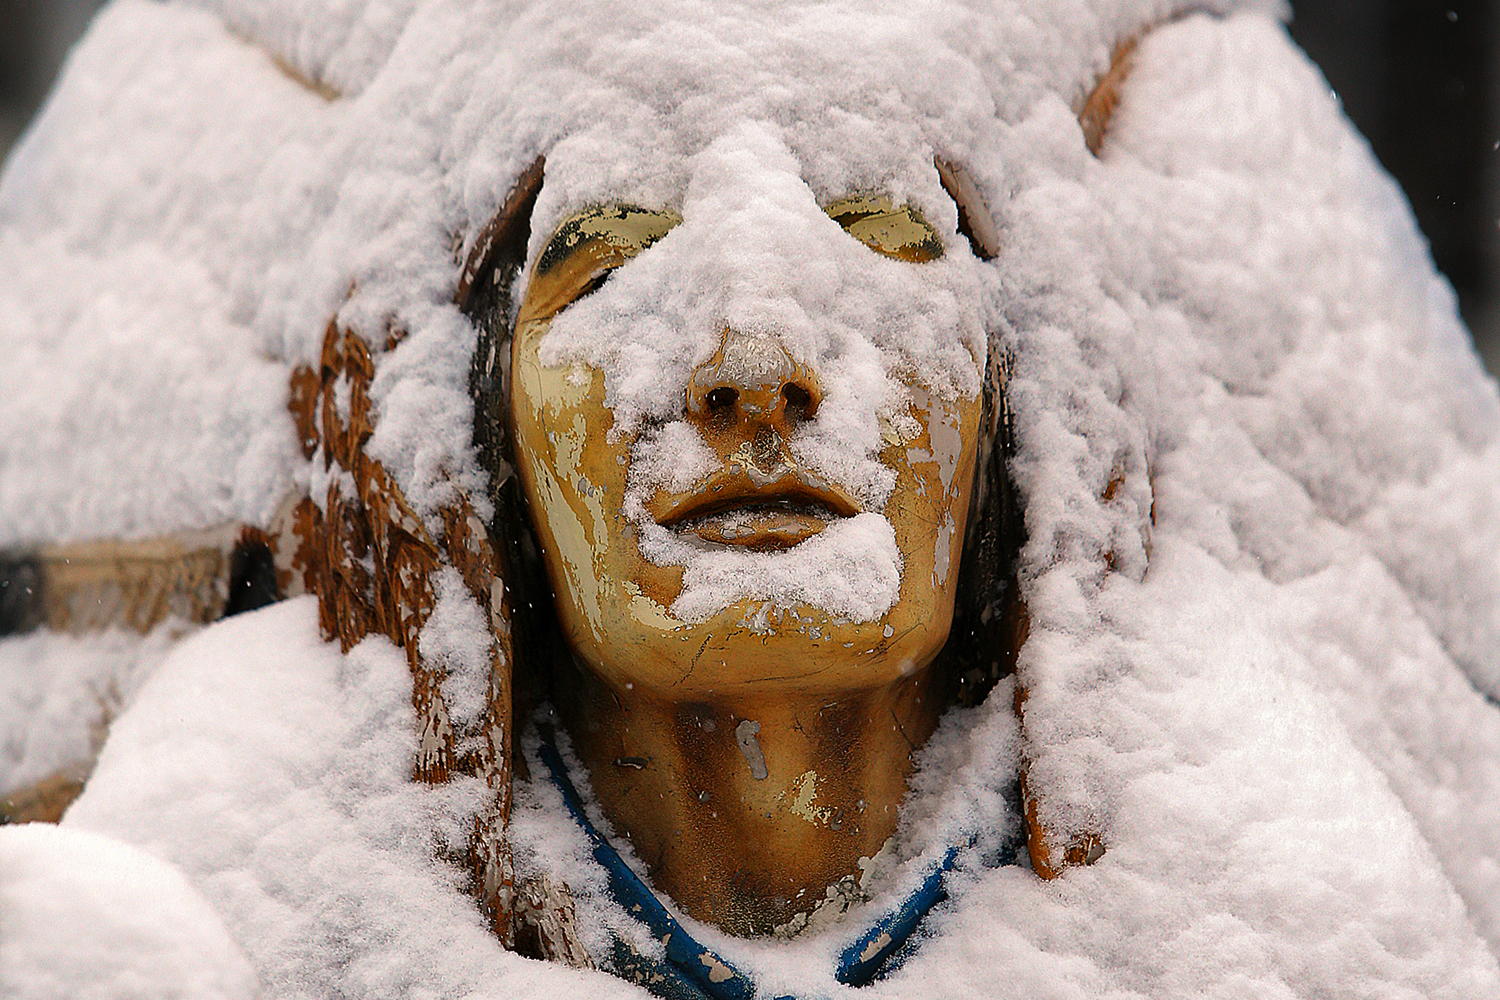 Feb. 12, 2014. The face of an Native American statue at the Chattahoochee Ruby Mine is barely visible, covered with inches of fresh snow on Main Street in Helen, Ga.